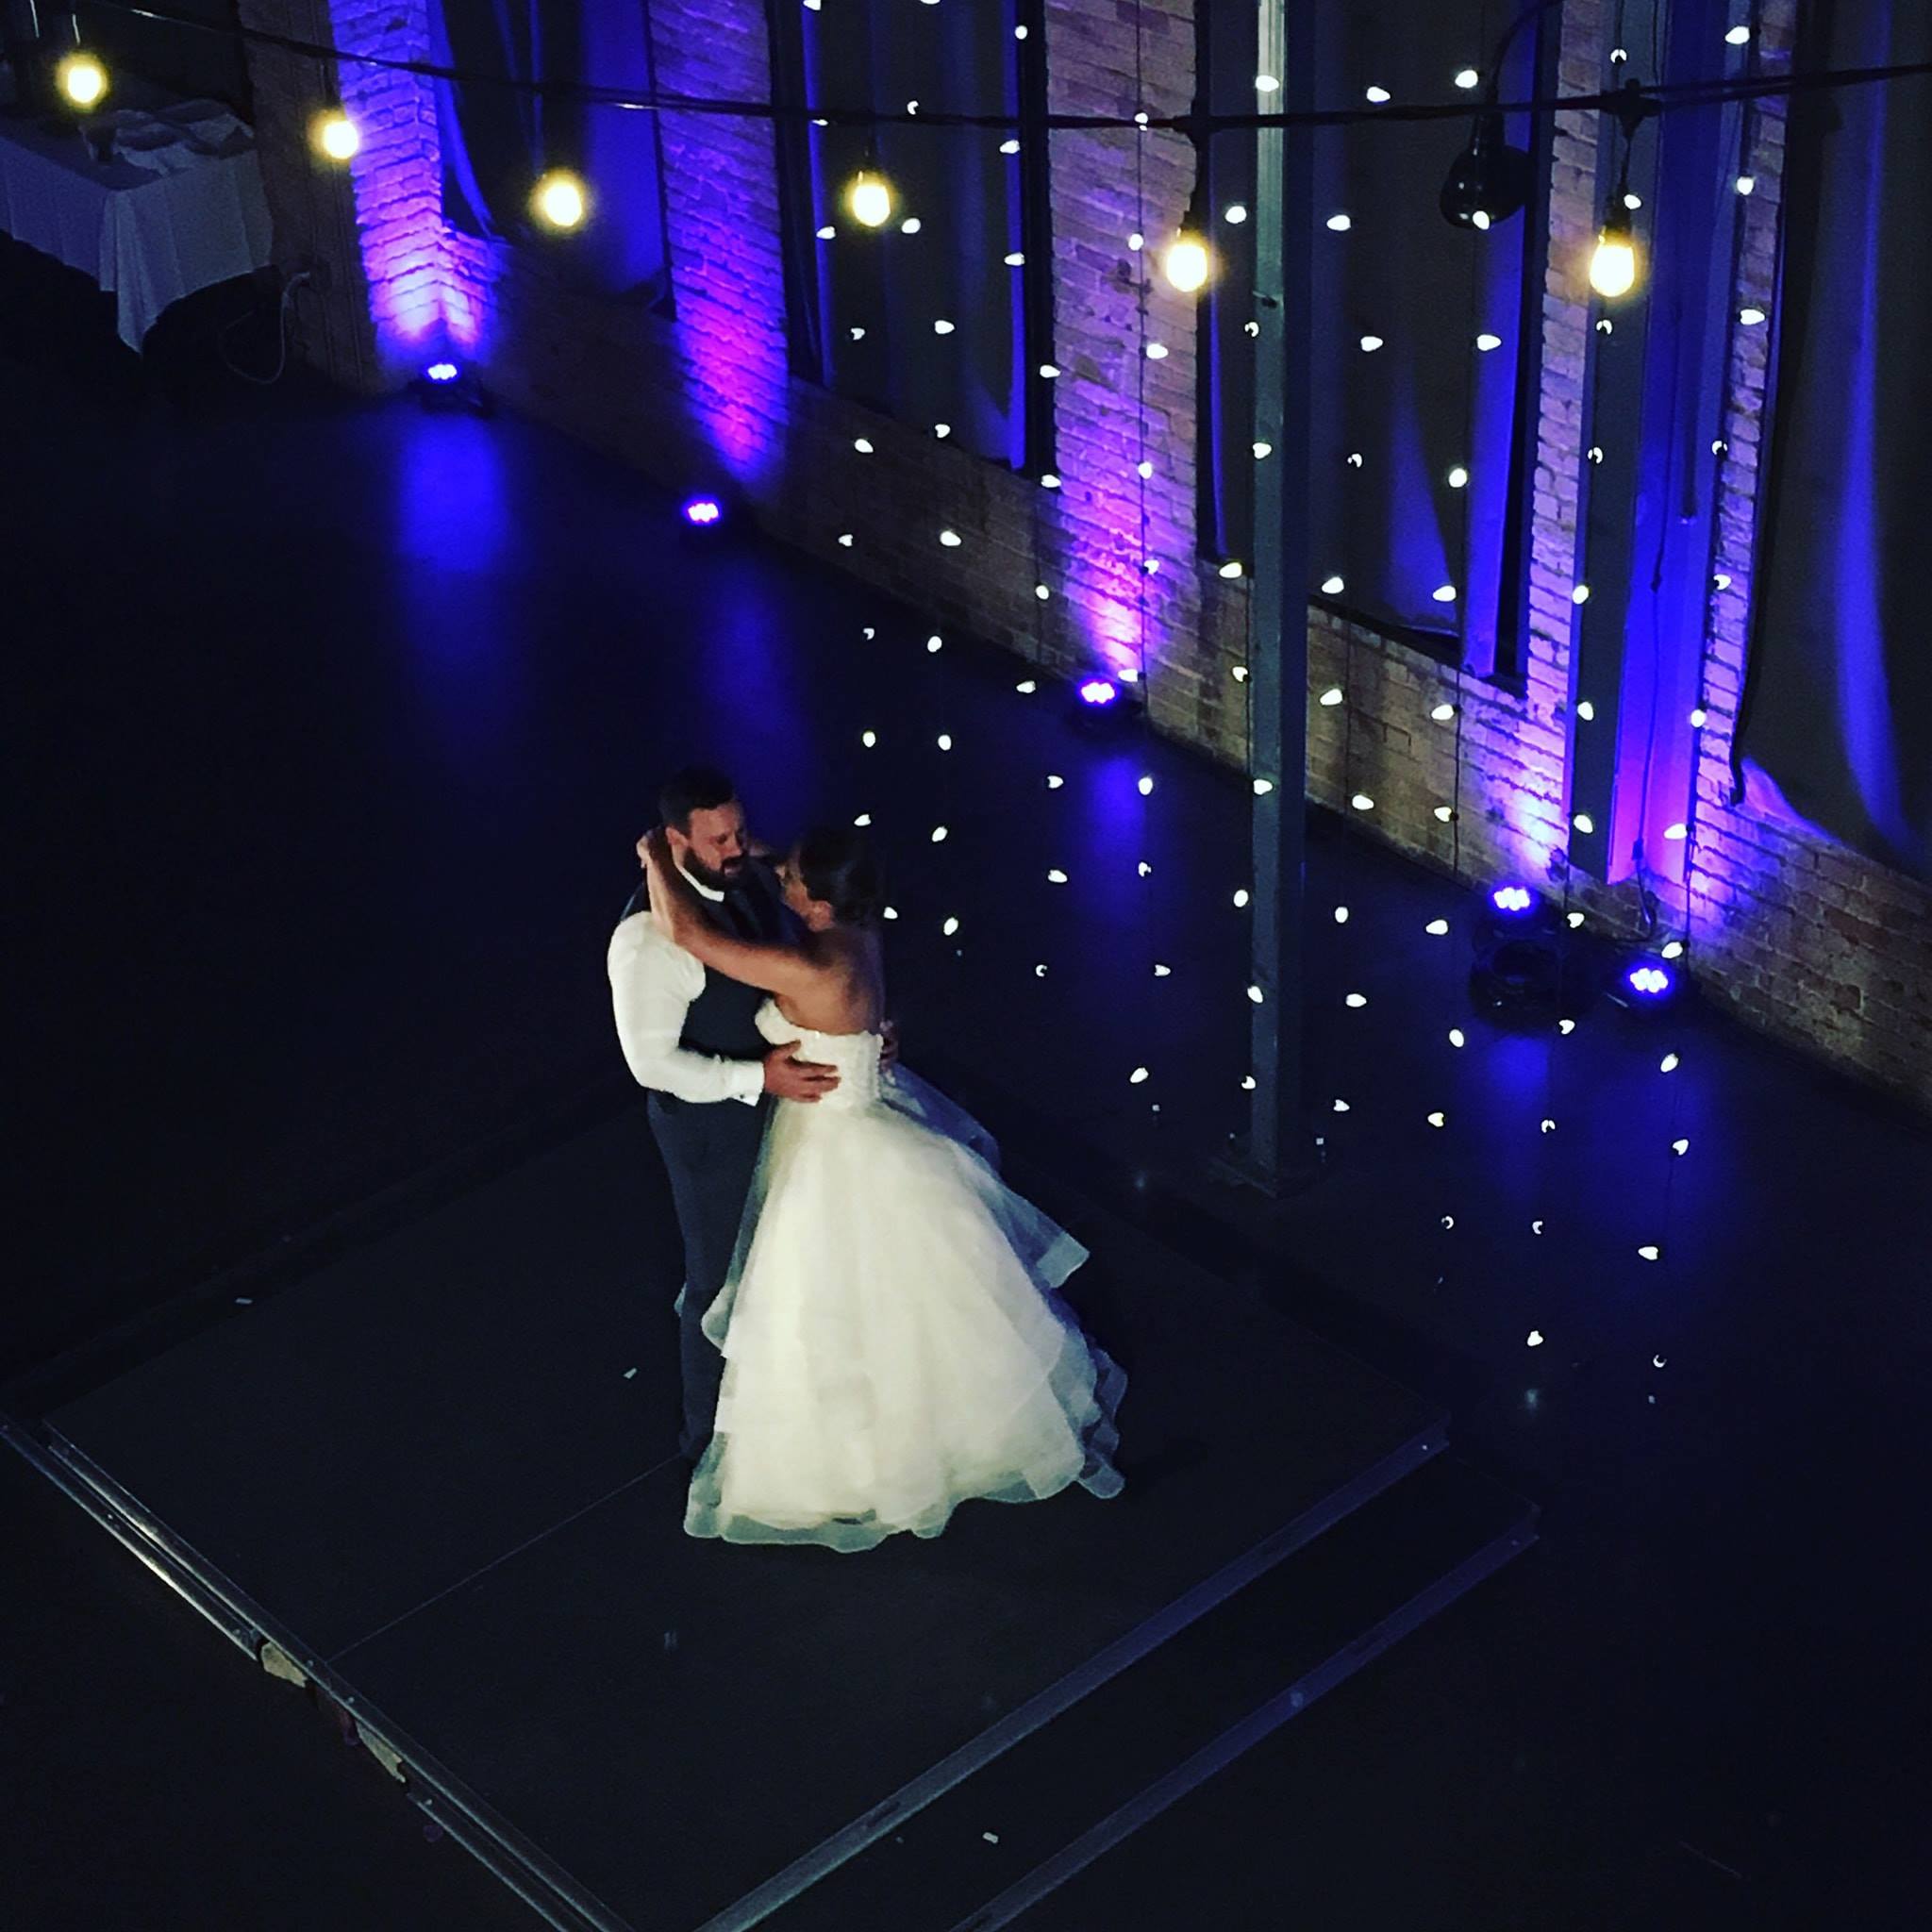 A Clyde wedding with bistro over the balcony as a backdrop by Duluth Event Lighting.